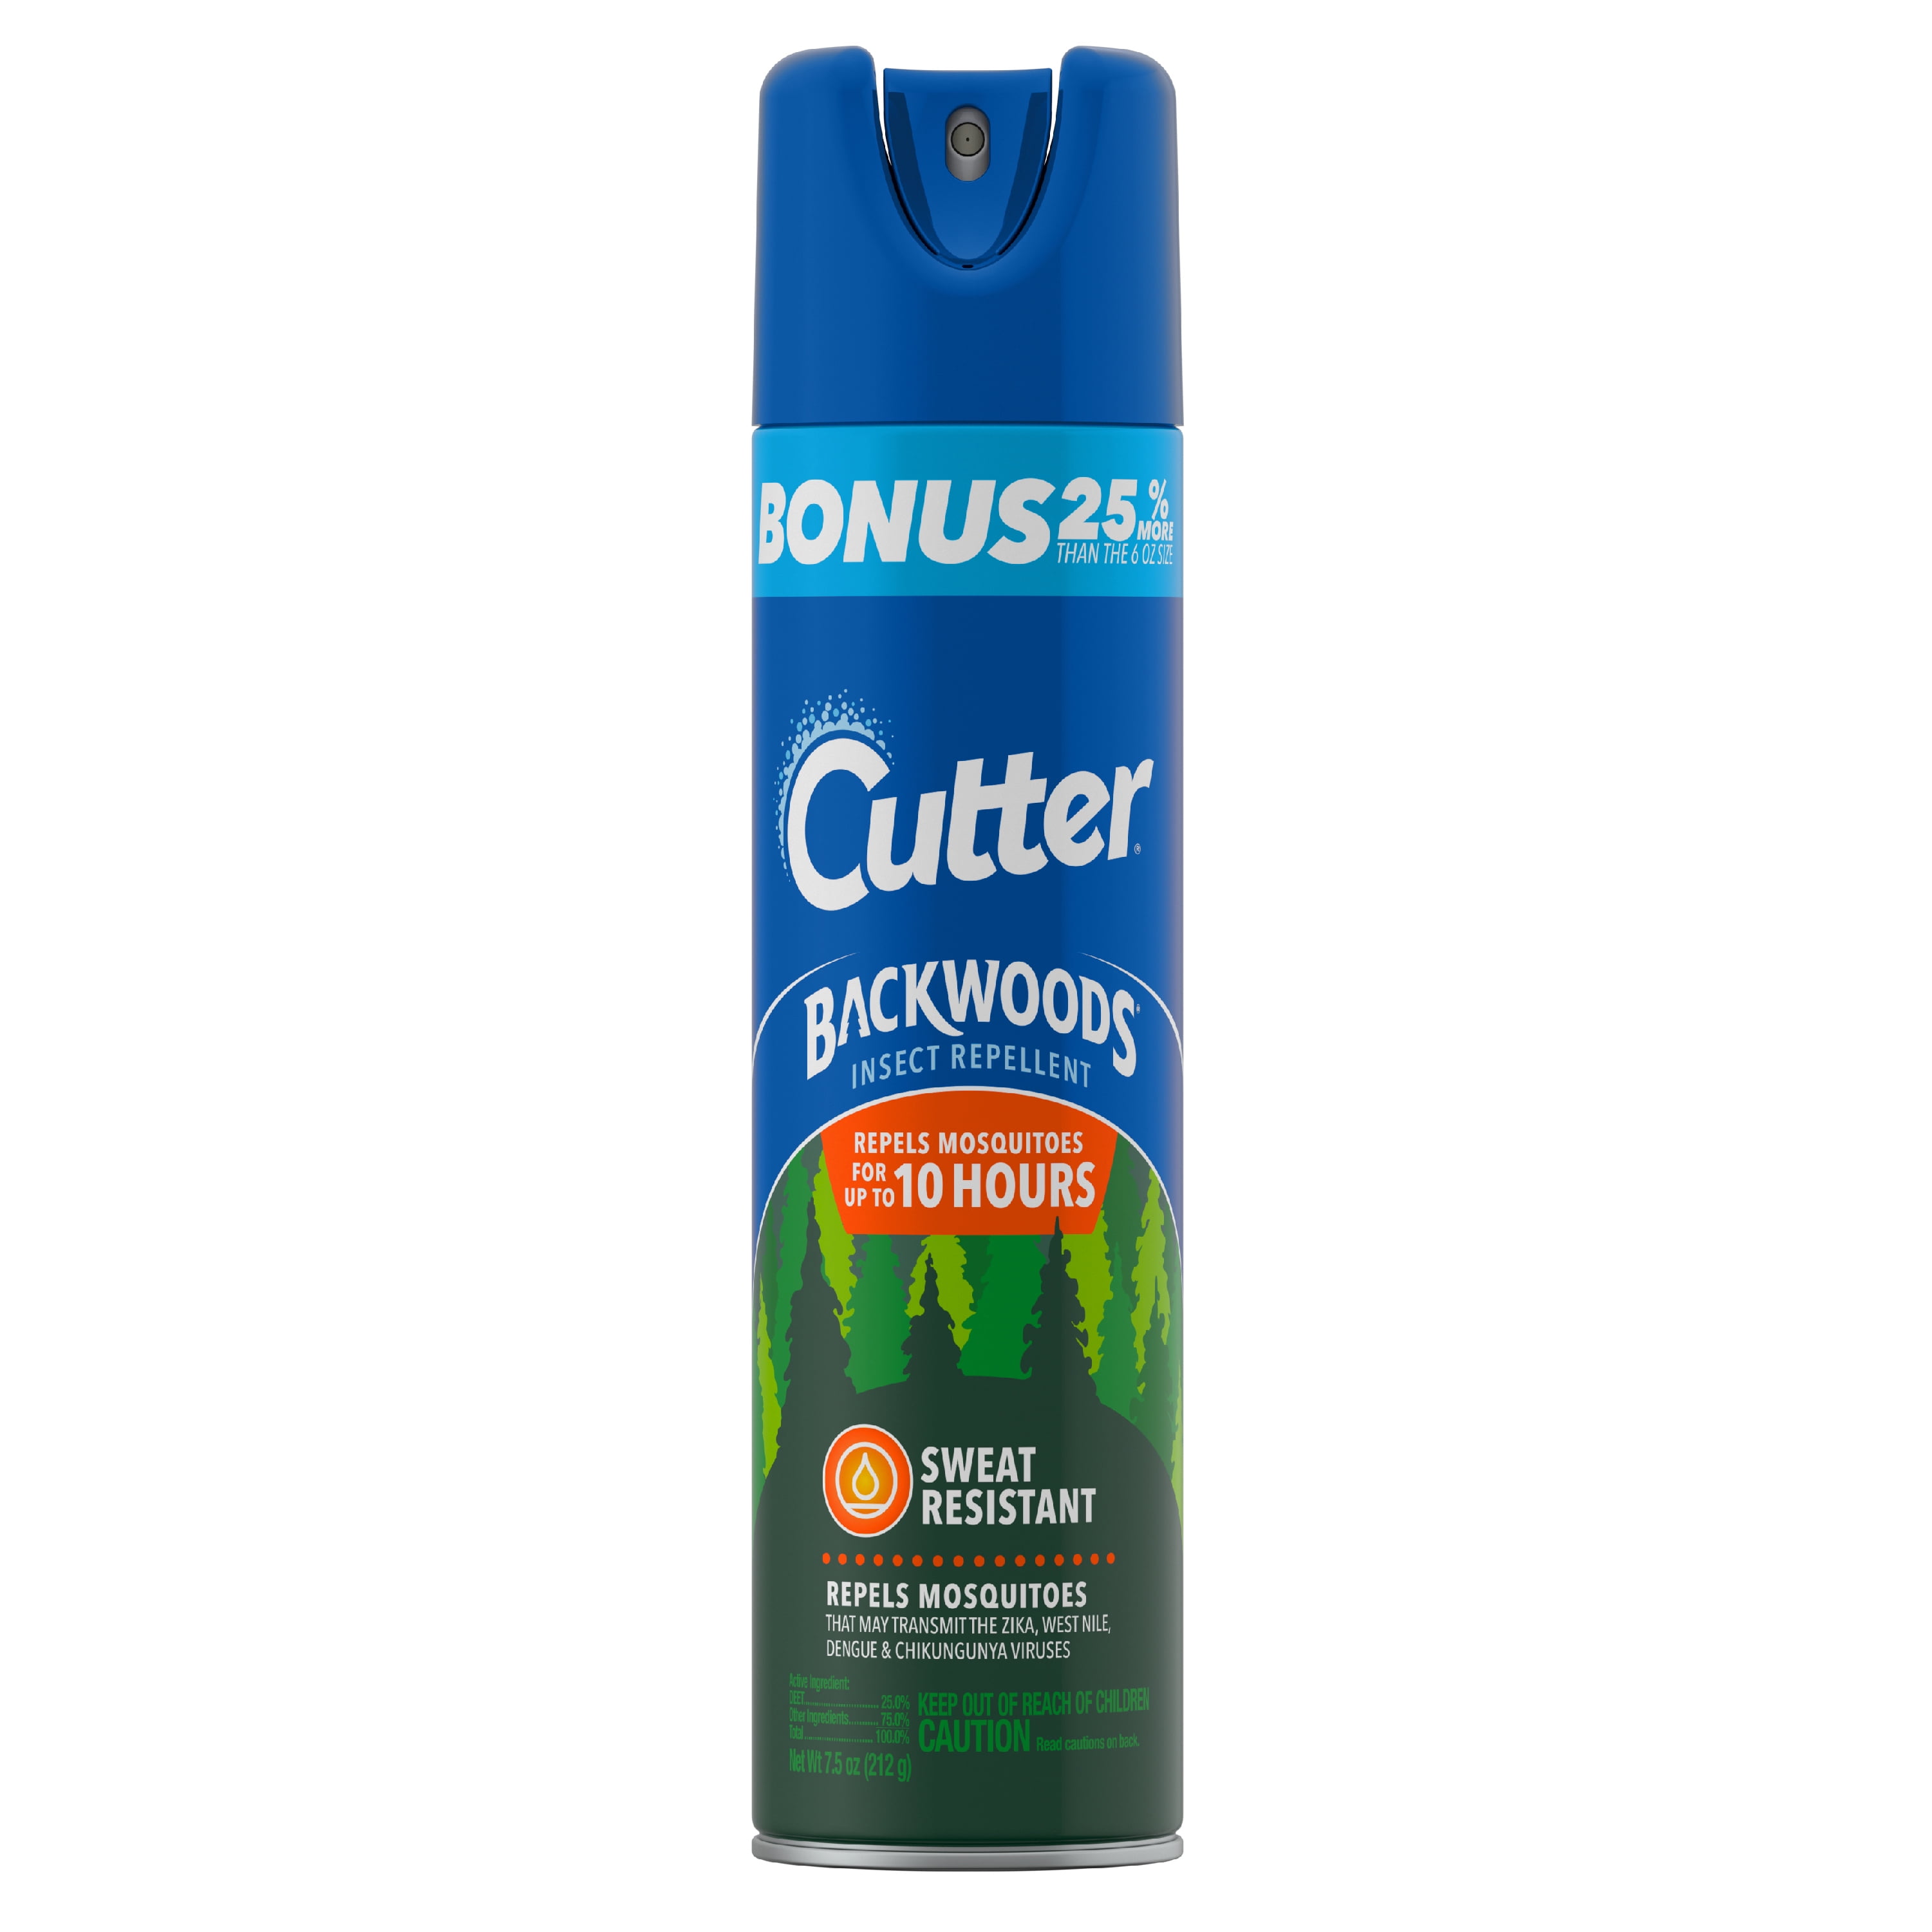 Cutter Backwoods Insect Repellent, 7.5 Ounces, Aerosol Spray